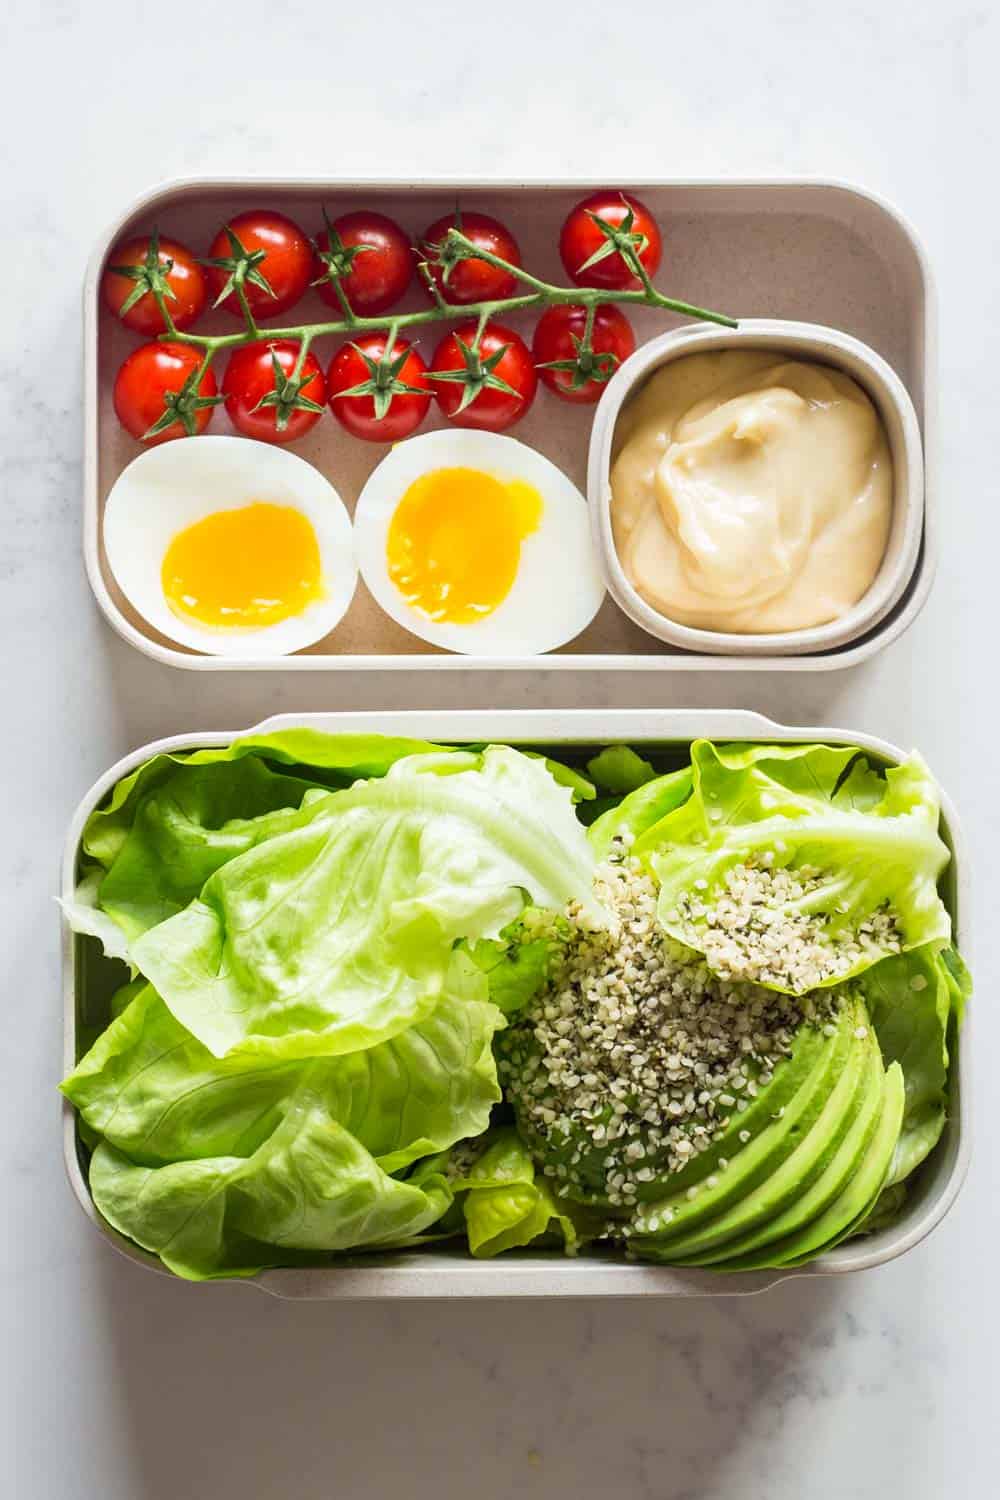 A healthy keto dinner for a complete keto diet plan- butter lettuce, avocado, hemp seed salad with mayonnaise, a soft boiled egg and cherry tomatoes.